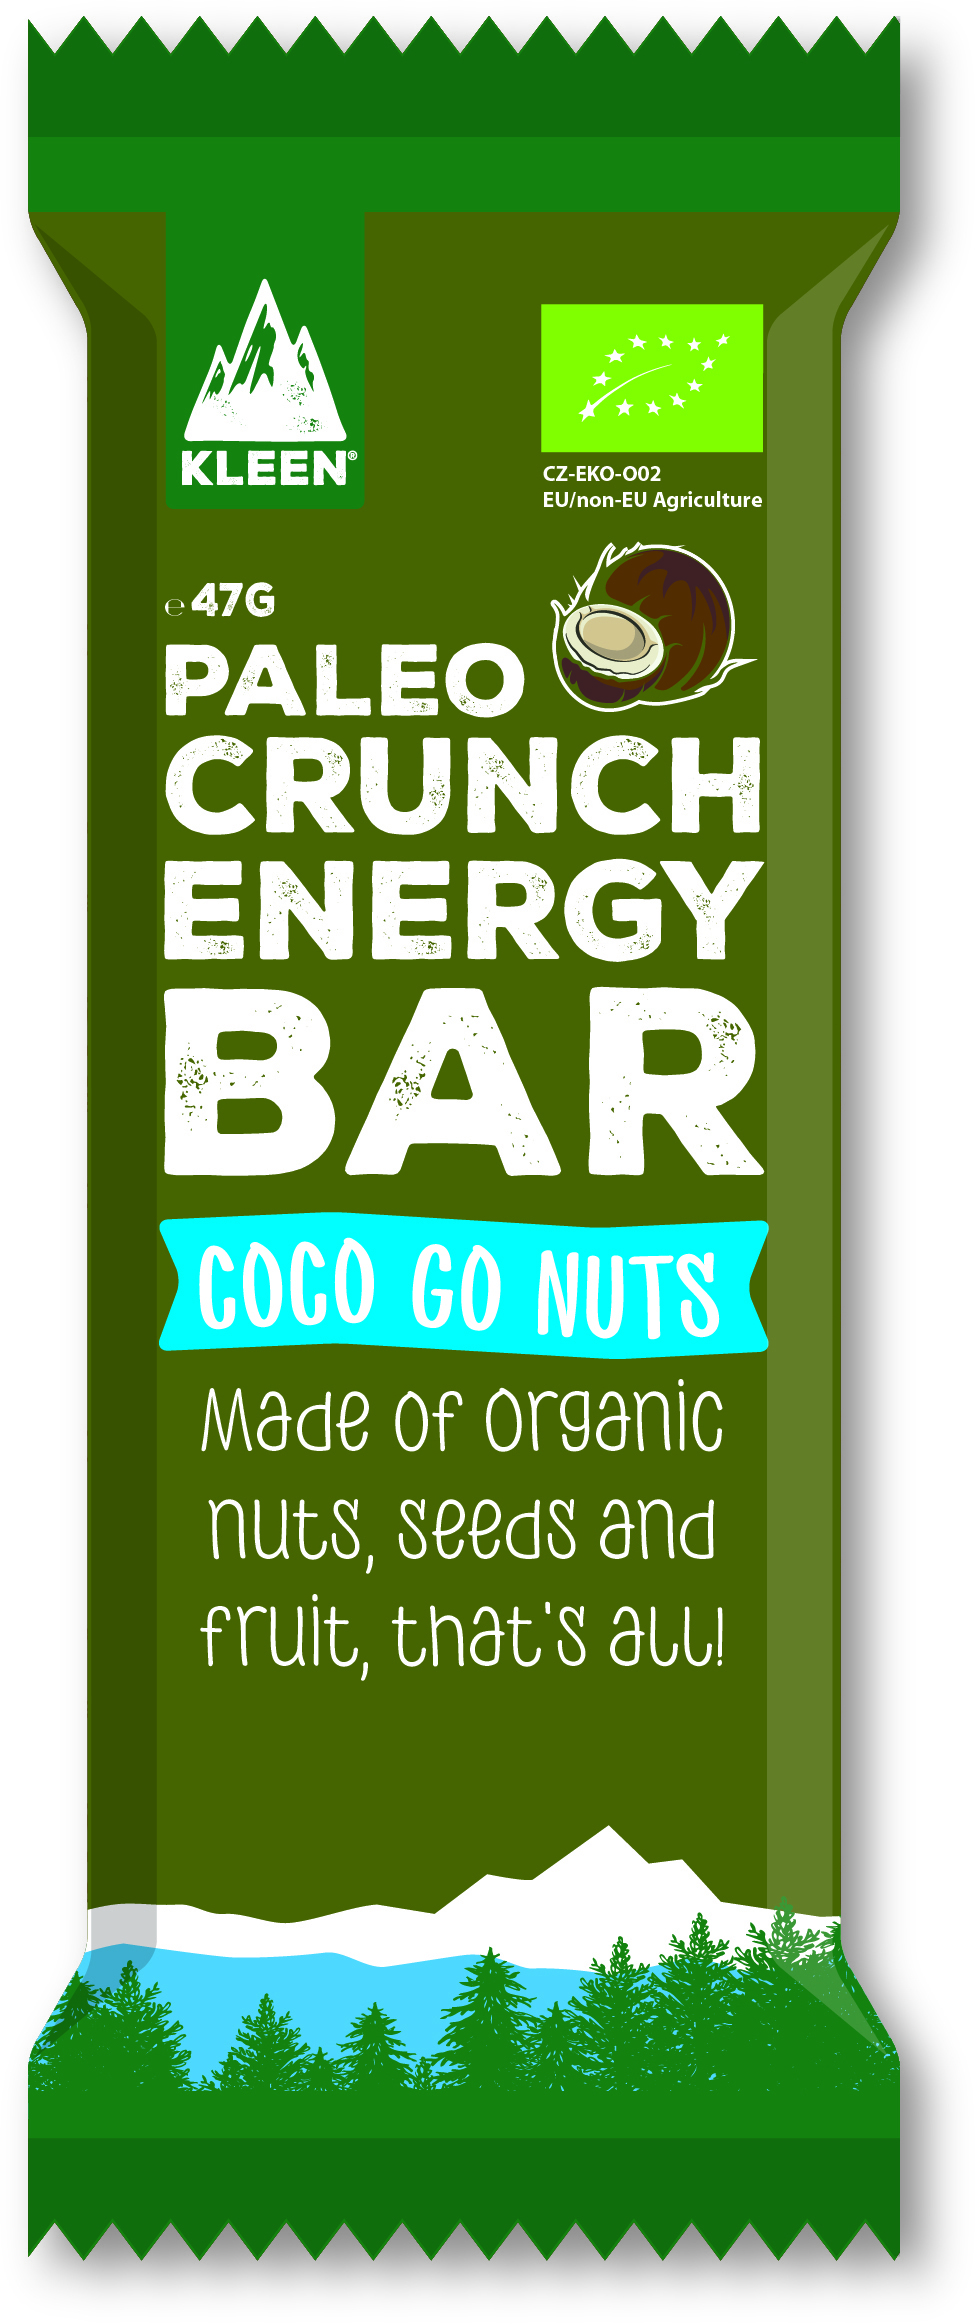 Kleen Sports Nutrition Kleen Paleo Crunch Energy Bar Coco Go Nuts 47g